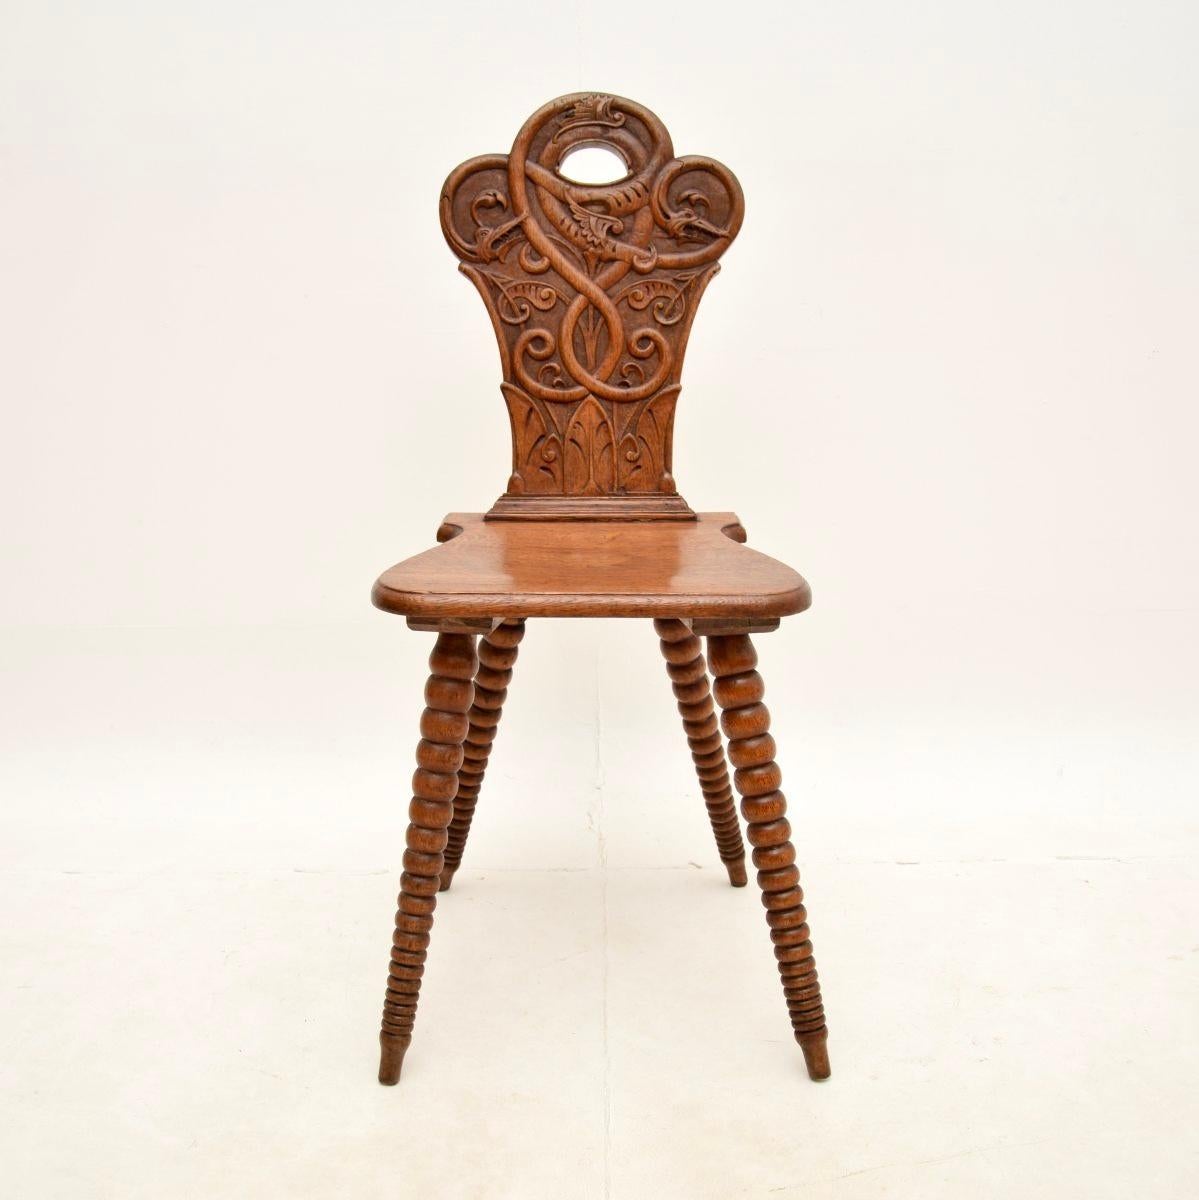 A wonderful antique carved oak bobbin chair, made in England and dating from around the 1880’s period.

It is of amazing quality, sitting on beautifully turned and splayed bobbin legs. The back rest is also beautifully carved, with fine and